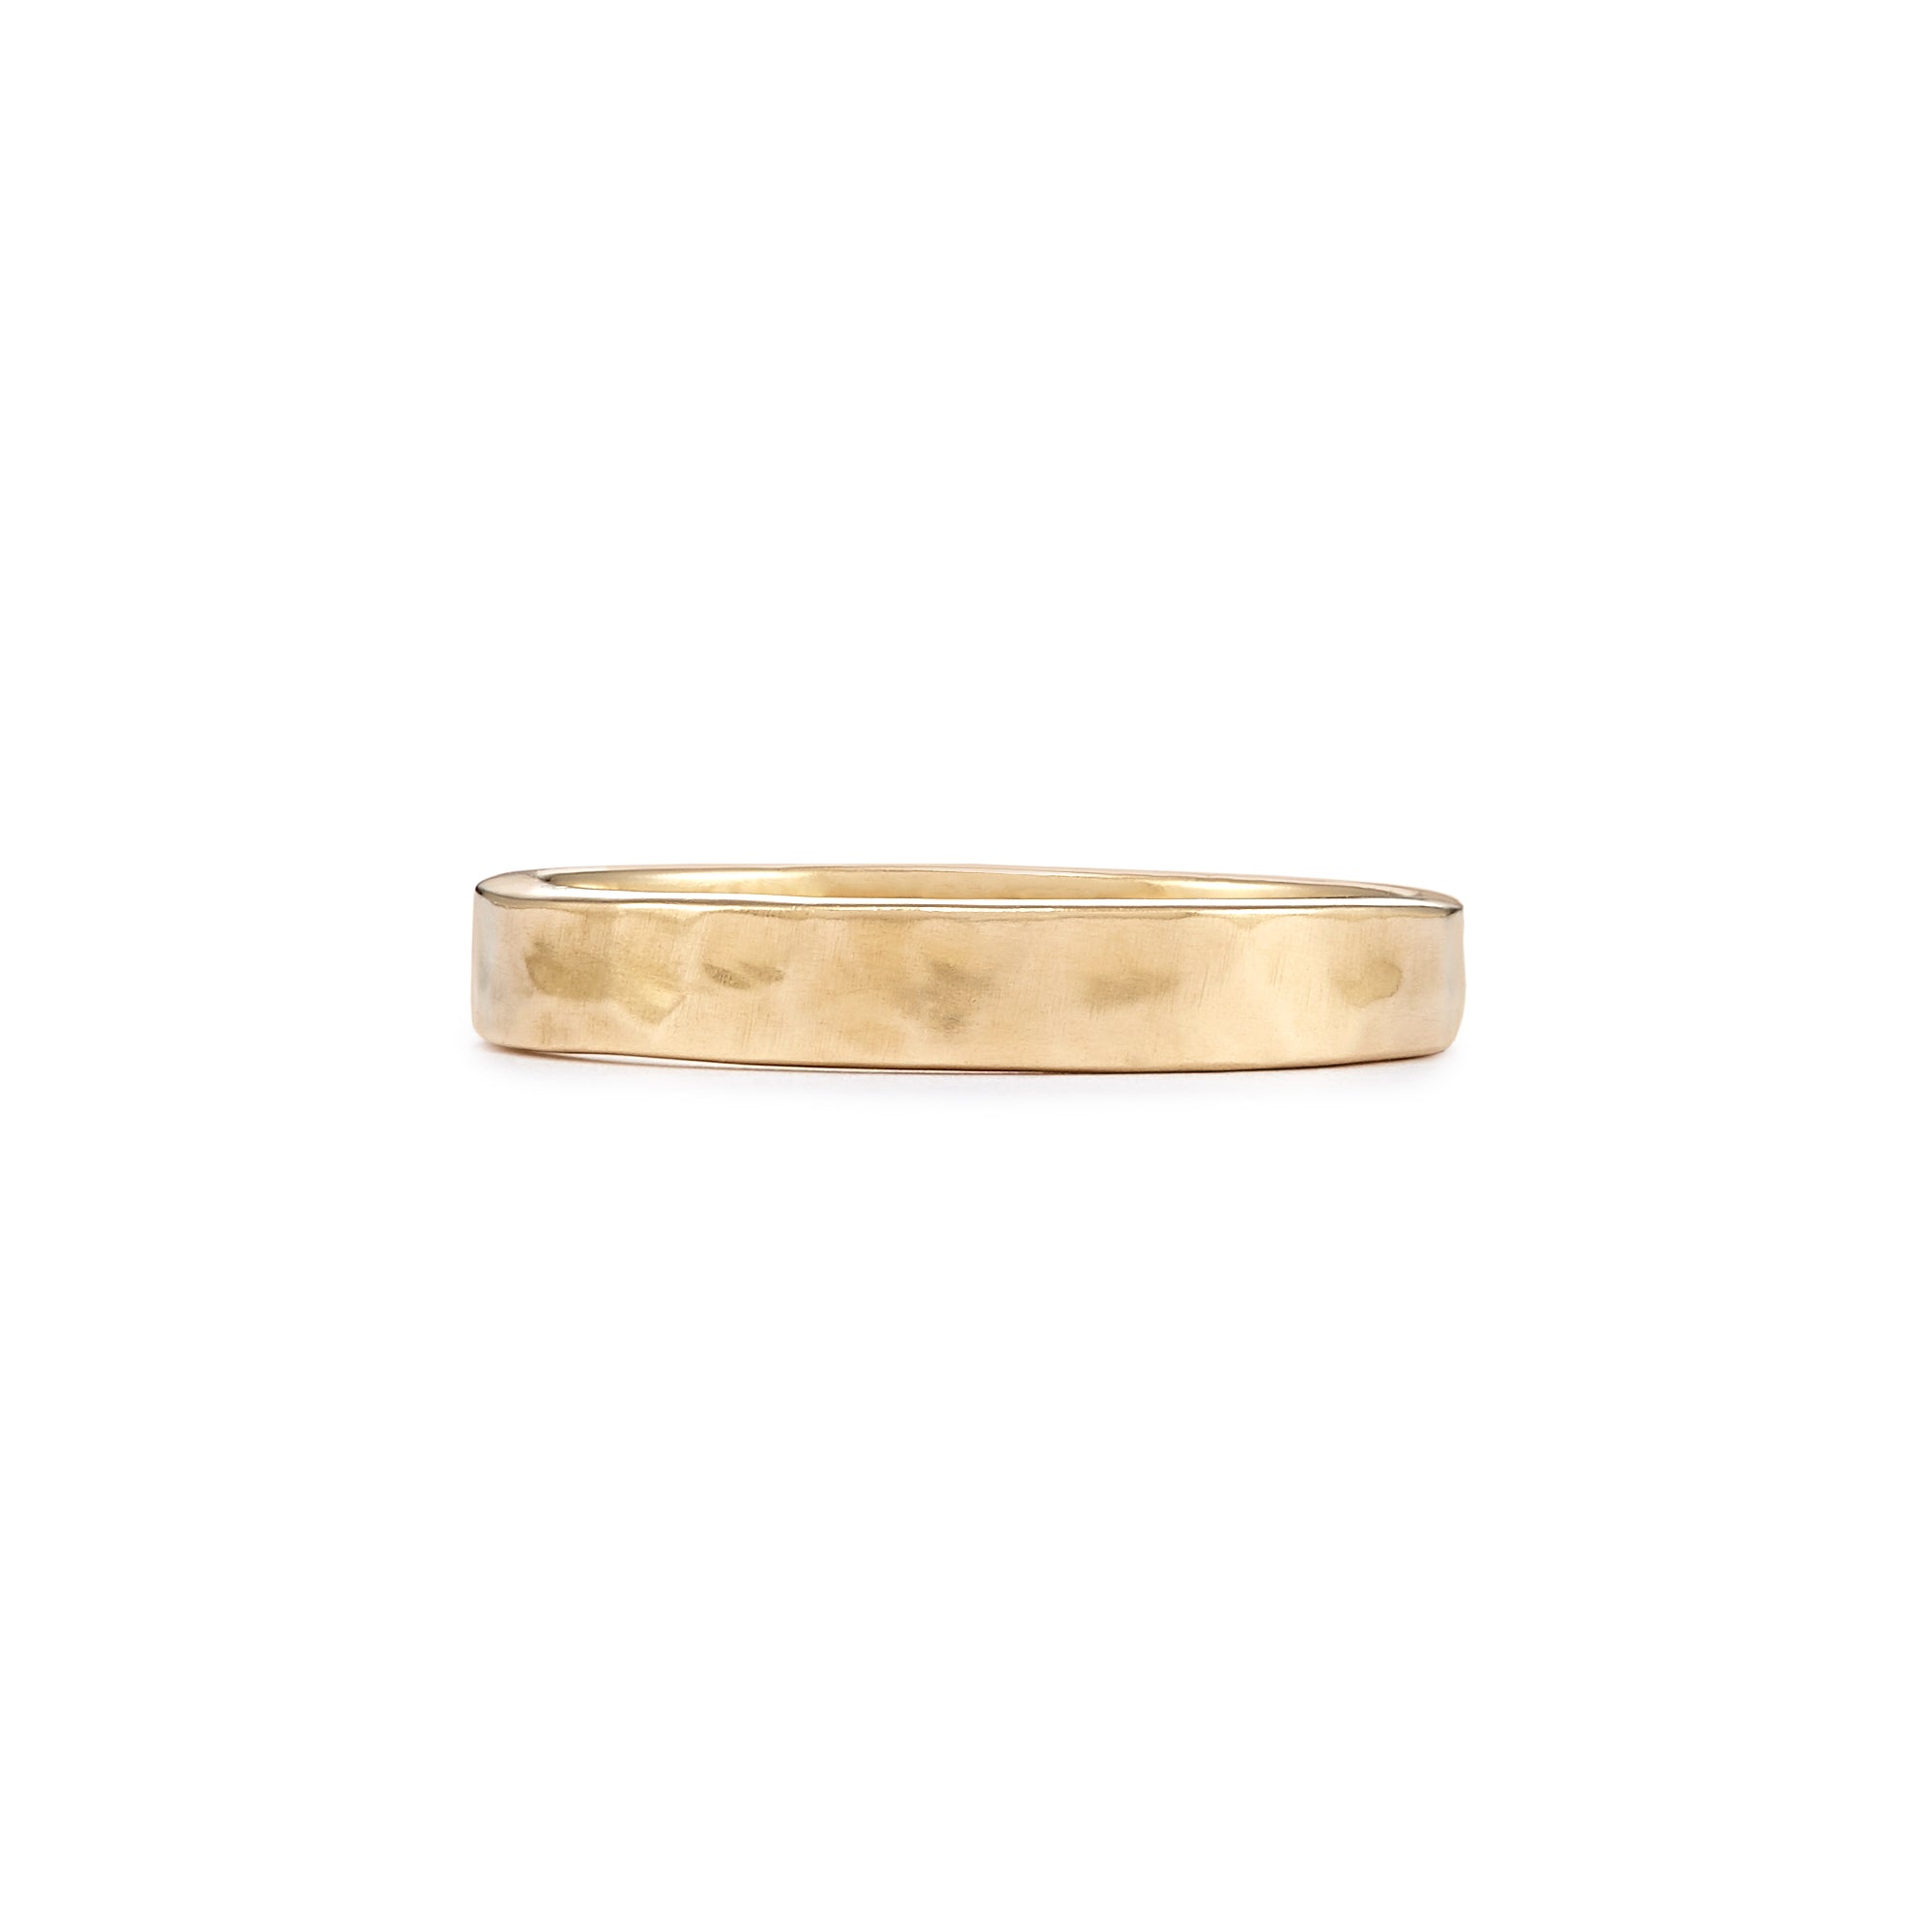 The unisex 3.5mm Classic Band in 14k gold features a lovely hammered texture with a soft matte finish.